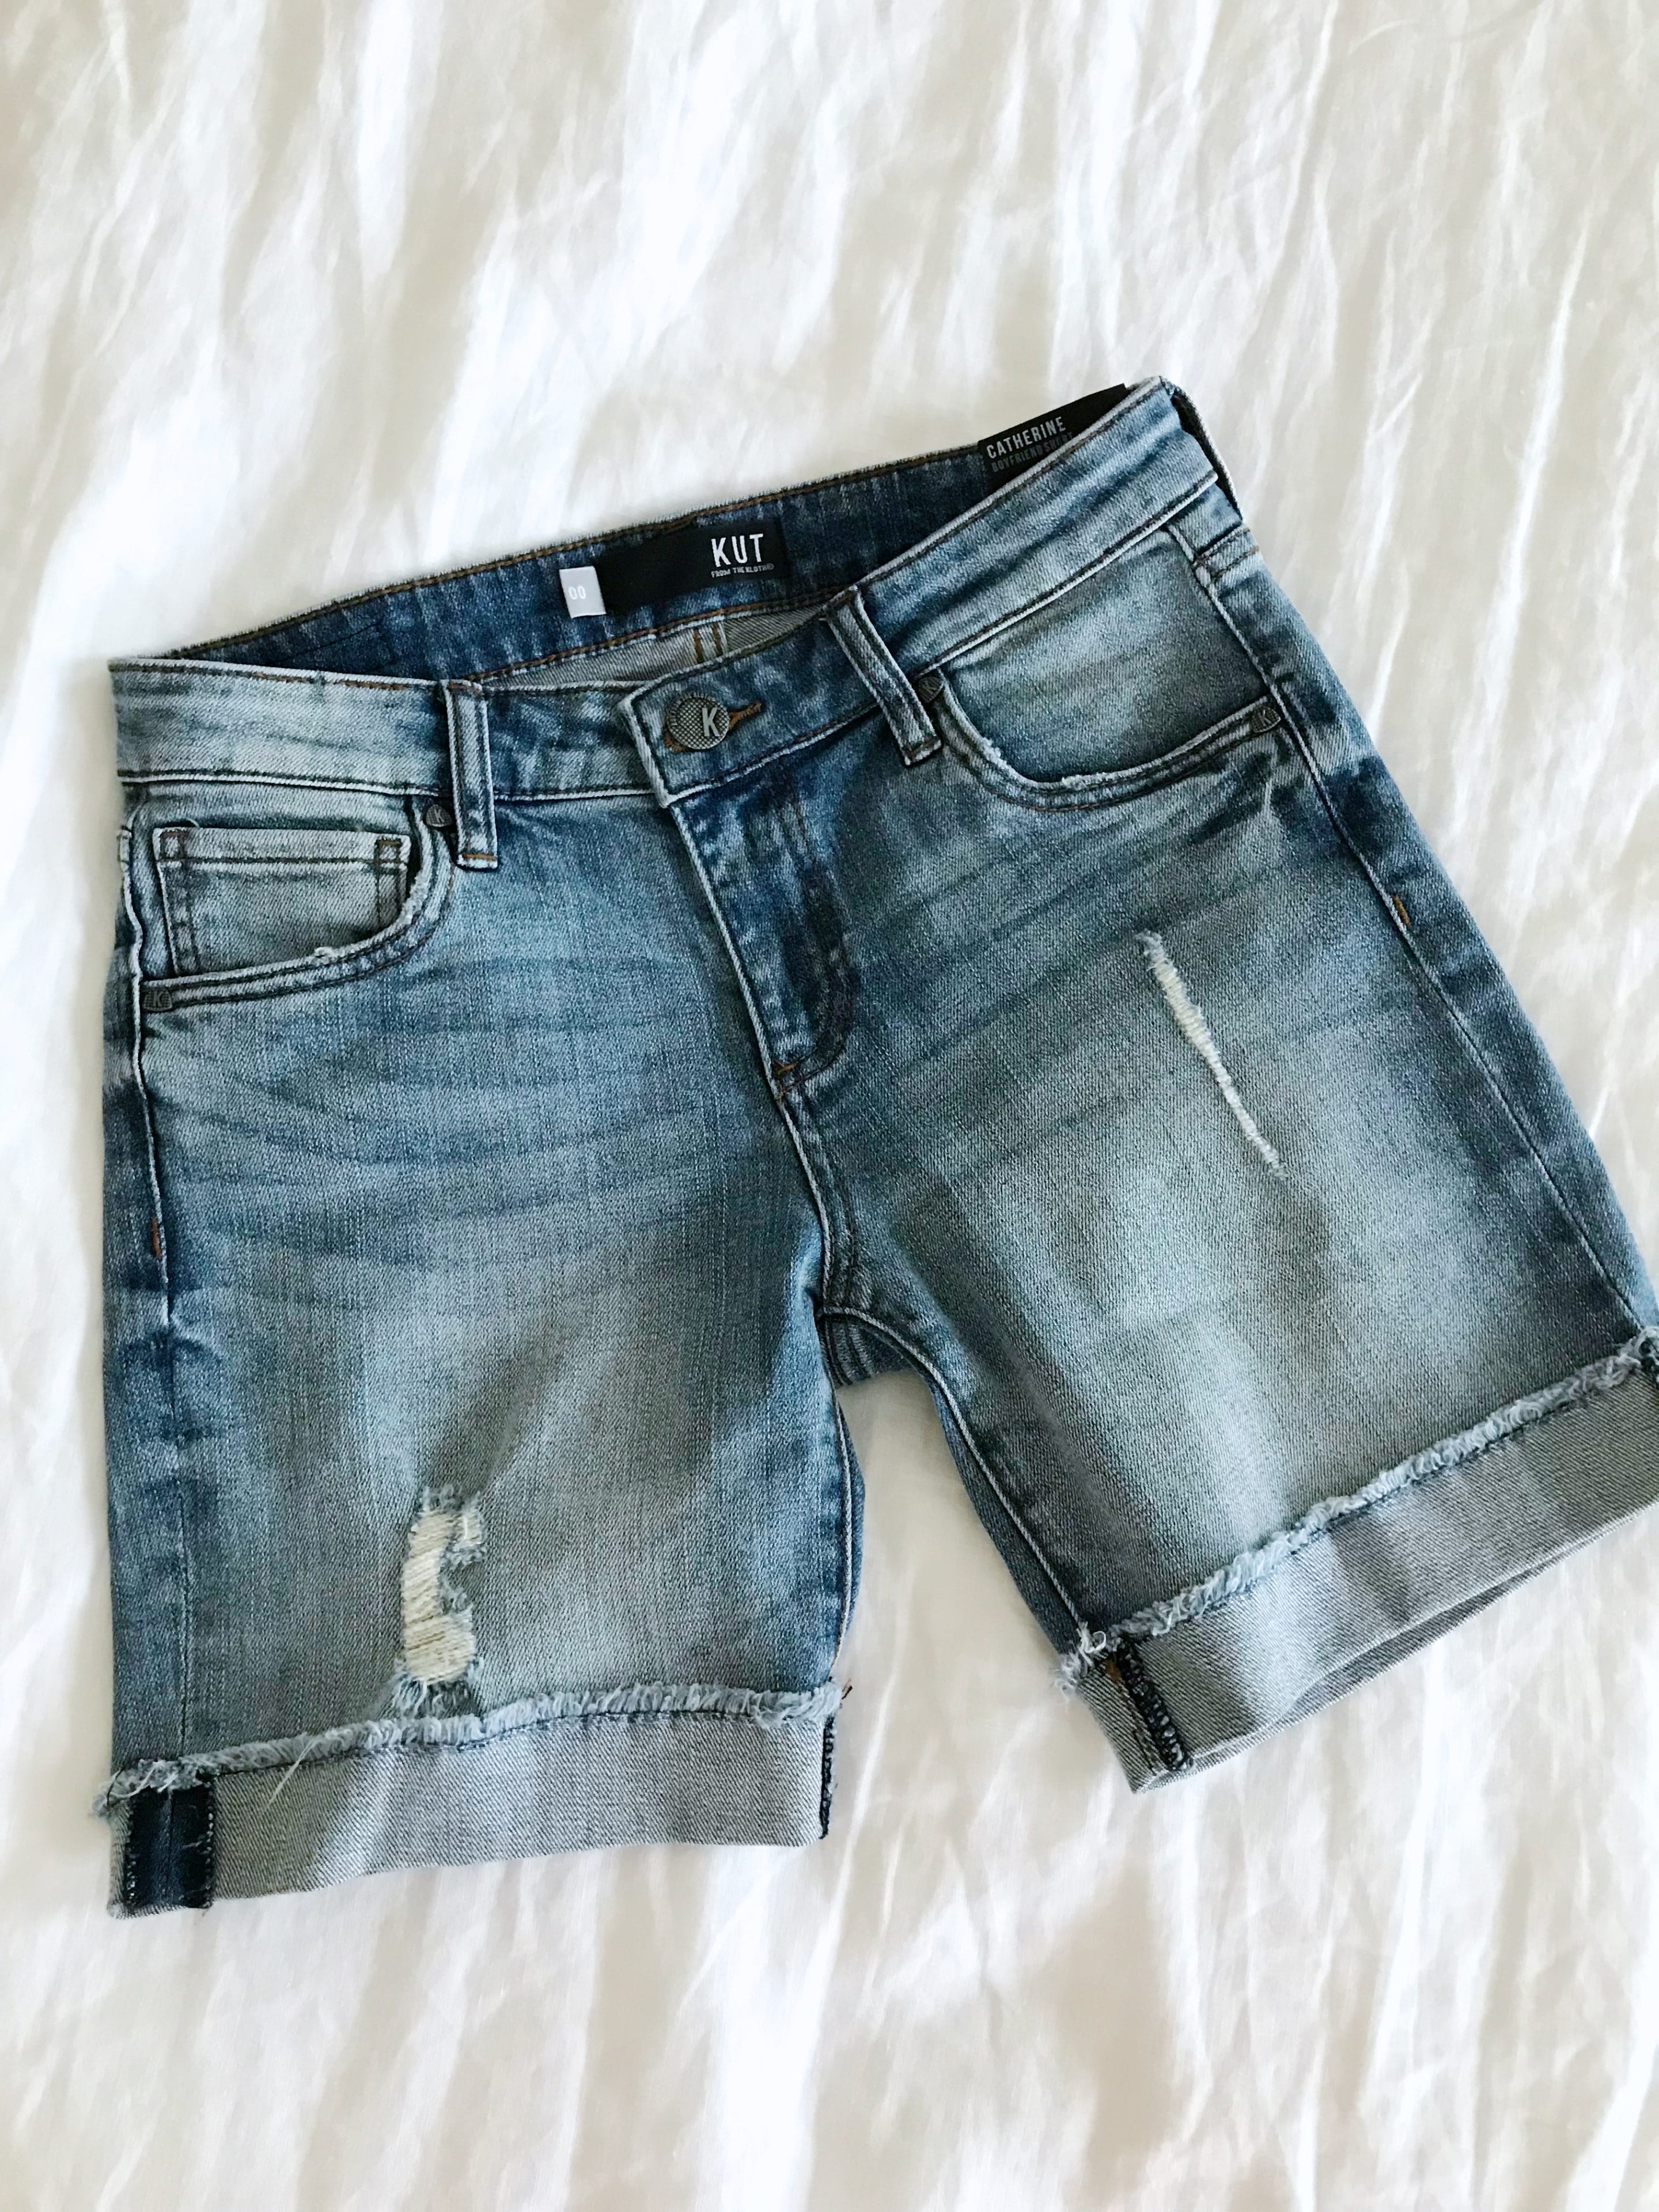 REVIEW : Best Jean Shorts for Summer - Honey We're Home